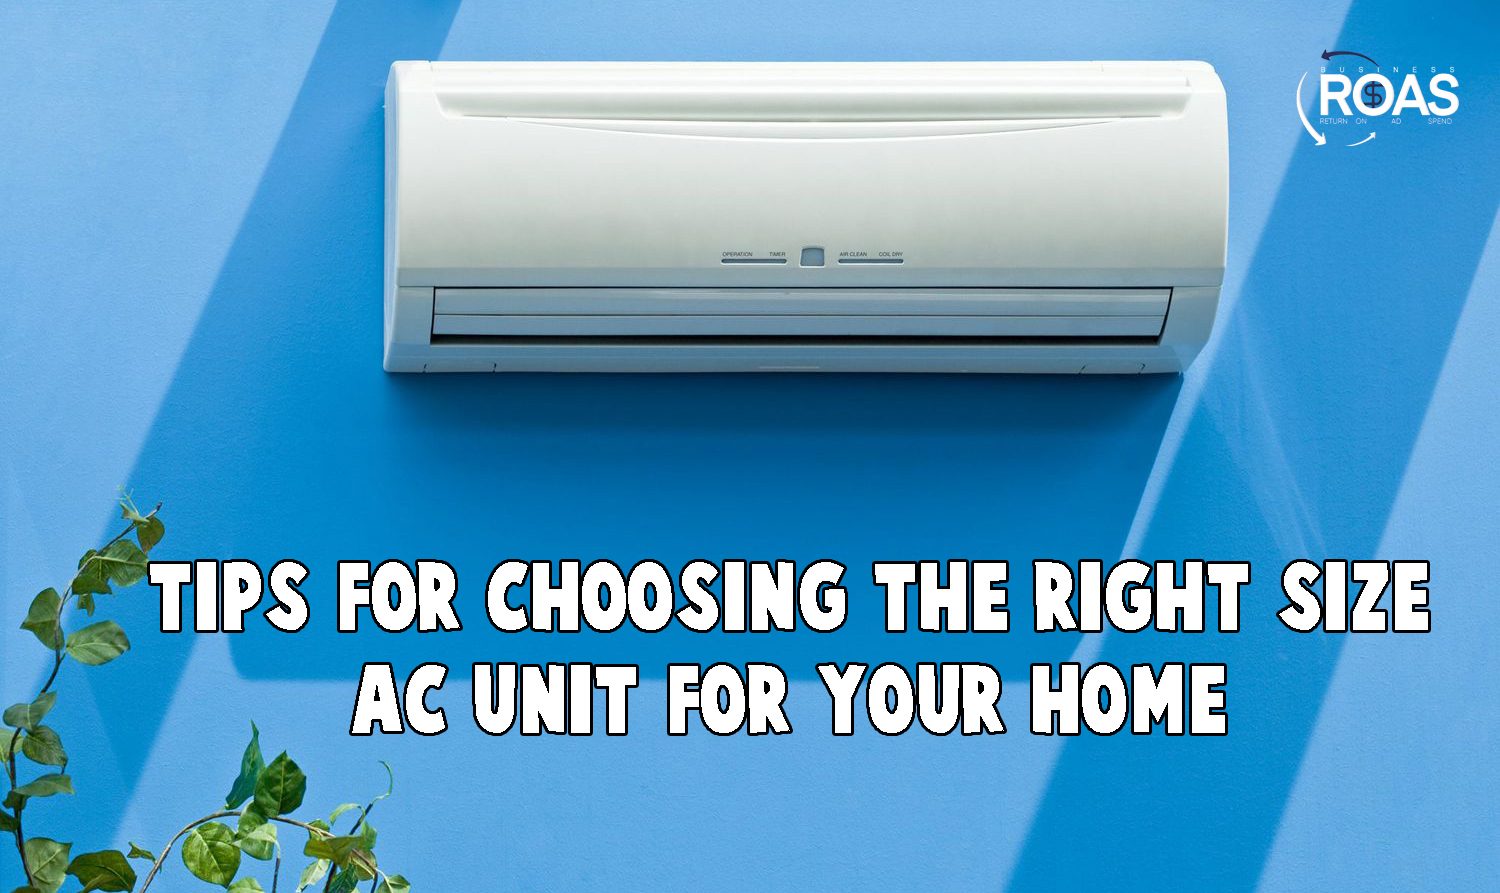 Tips for choosing the right size AC unit for your home